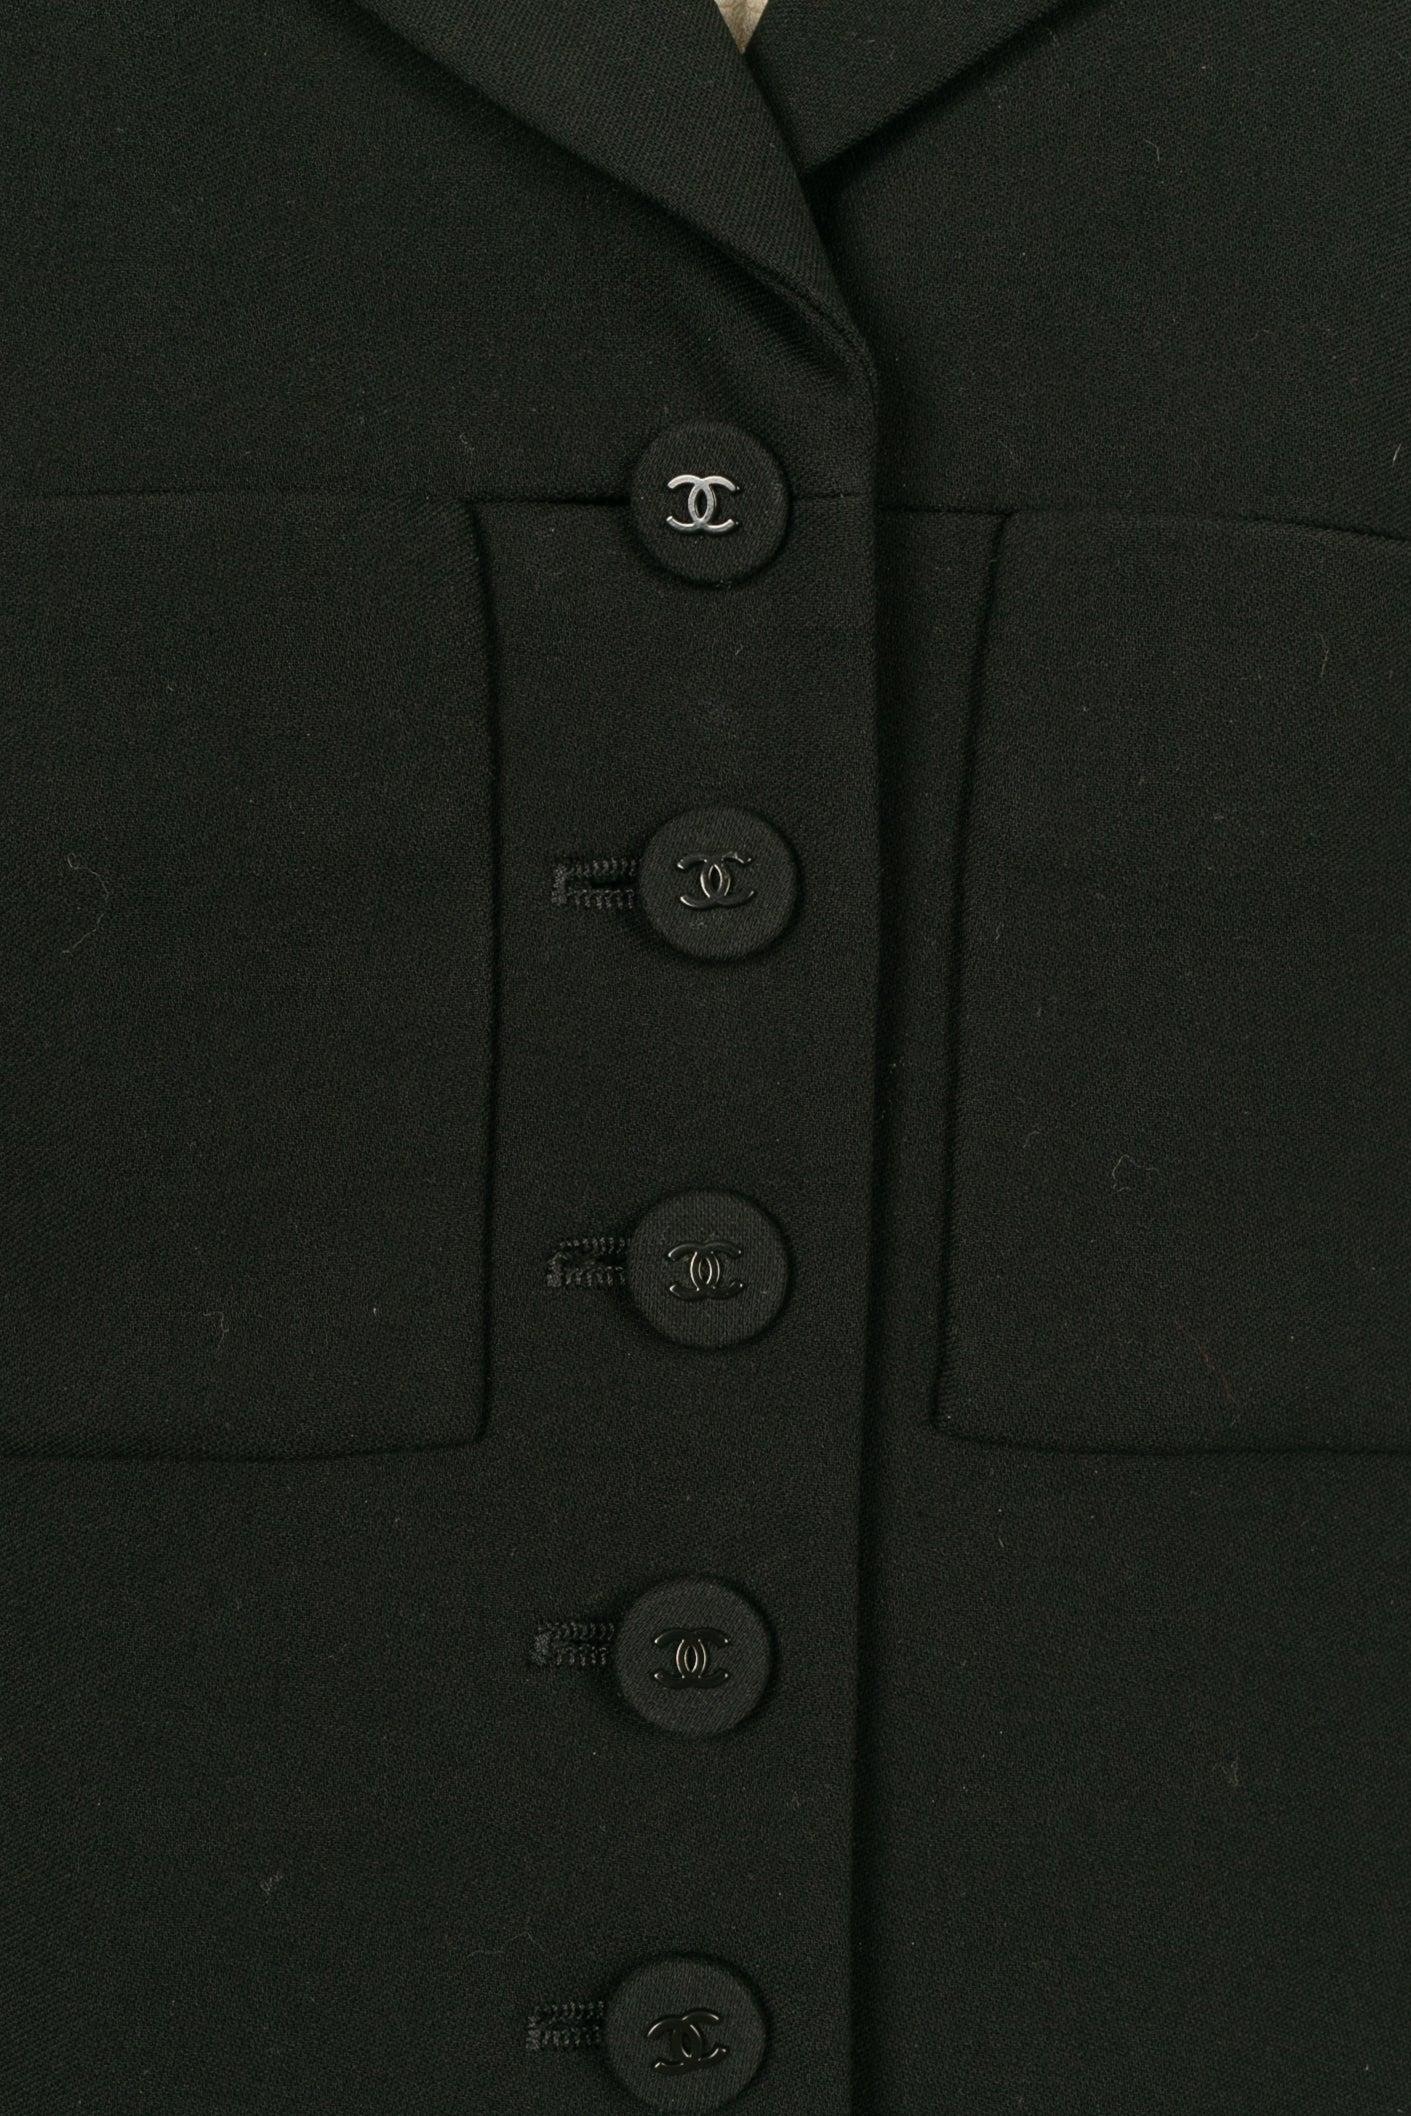 Chanel Suit Set of Jacket and Pants in Black Wool, 1997 For Sale 3